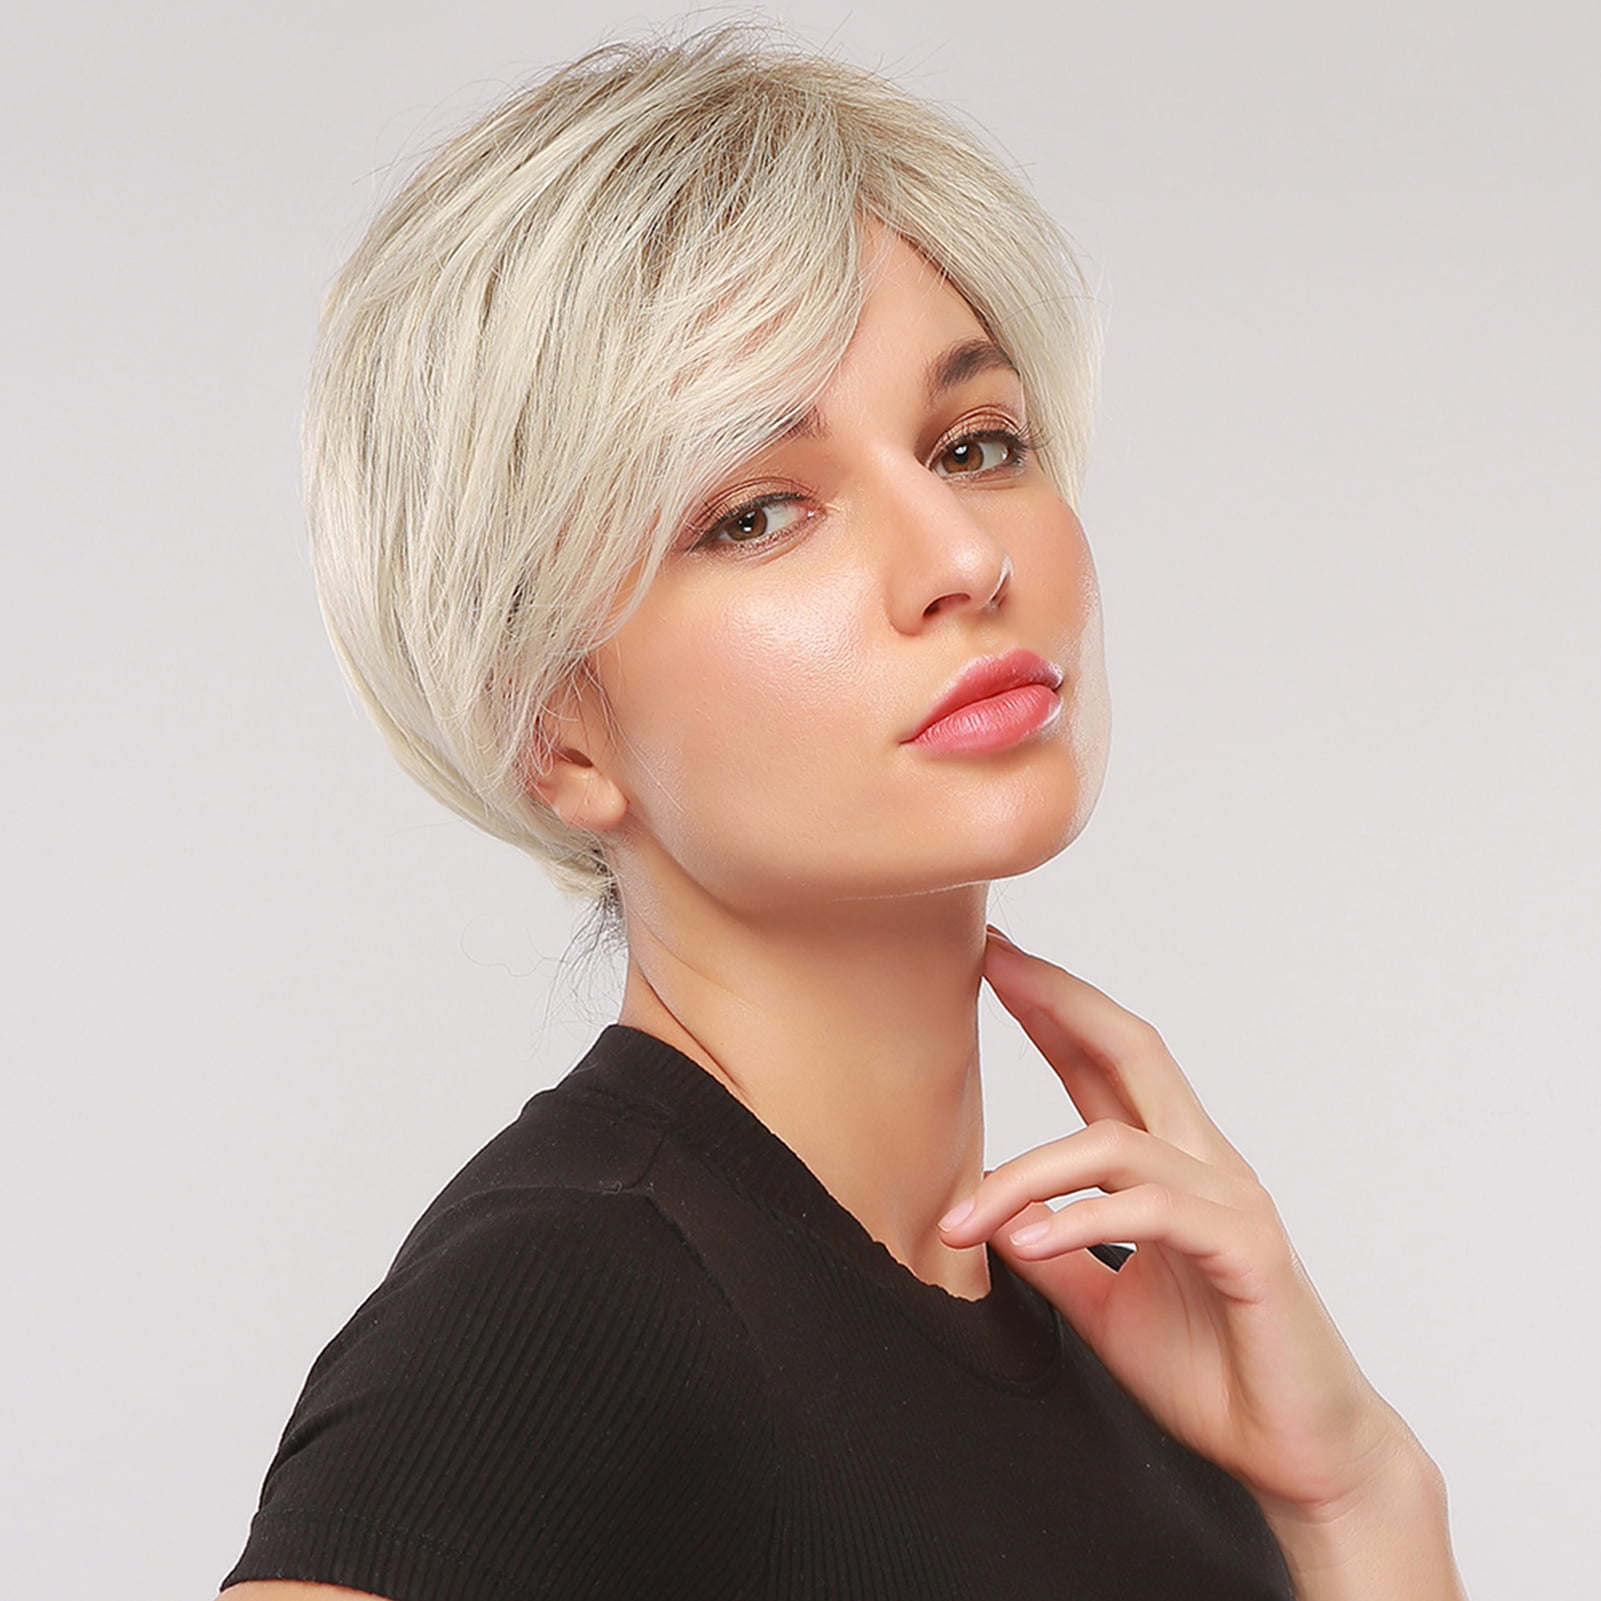 GXSR Women Short Pixie Cut Wigs for White Women, Short Platium Blonde Wigs  with Bangs Straight Layered Hairstyles for Women Men Daily Use Party -  